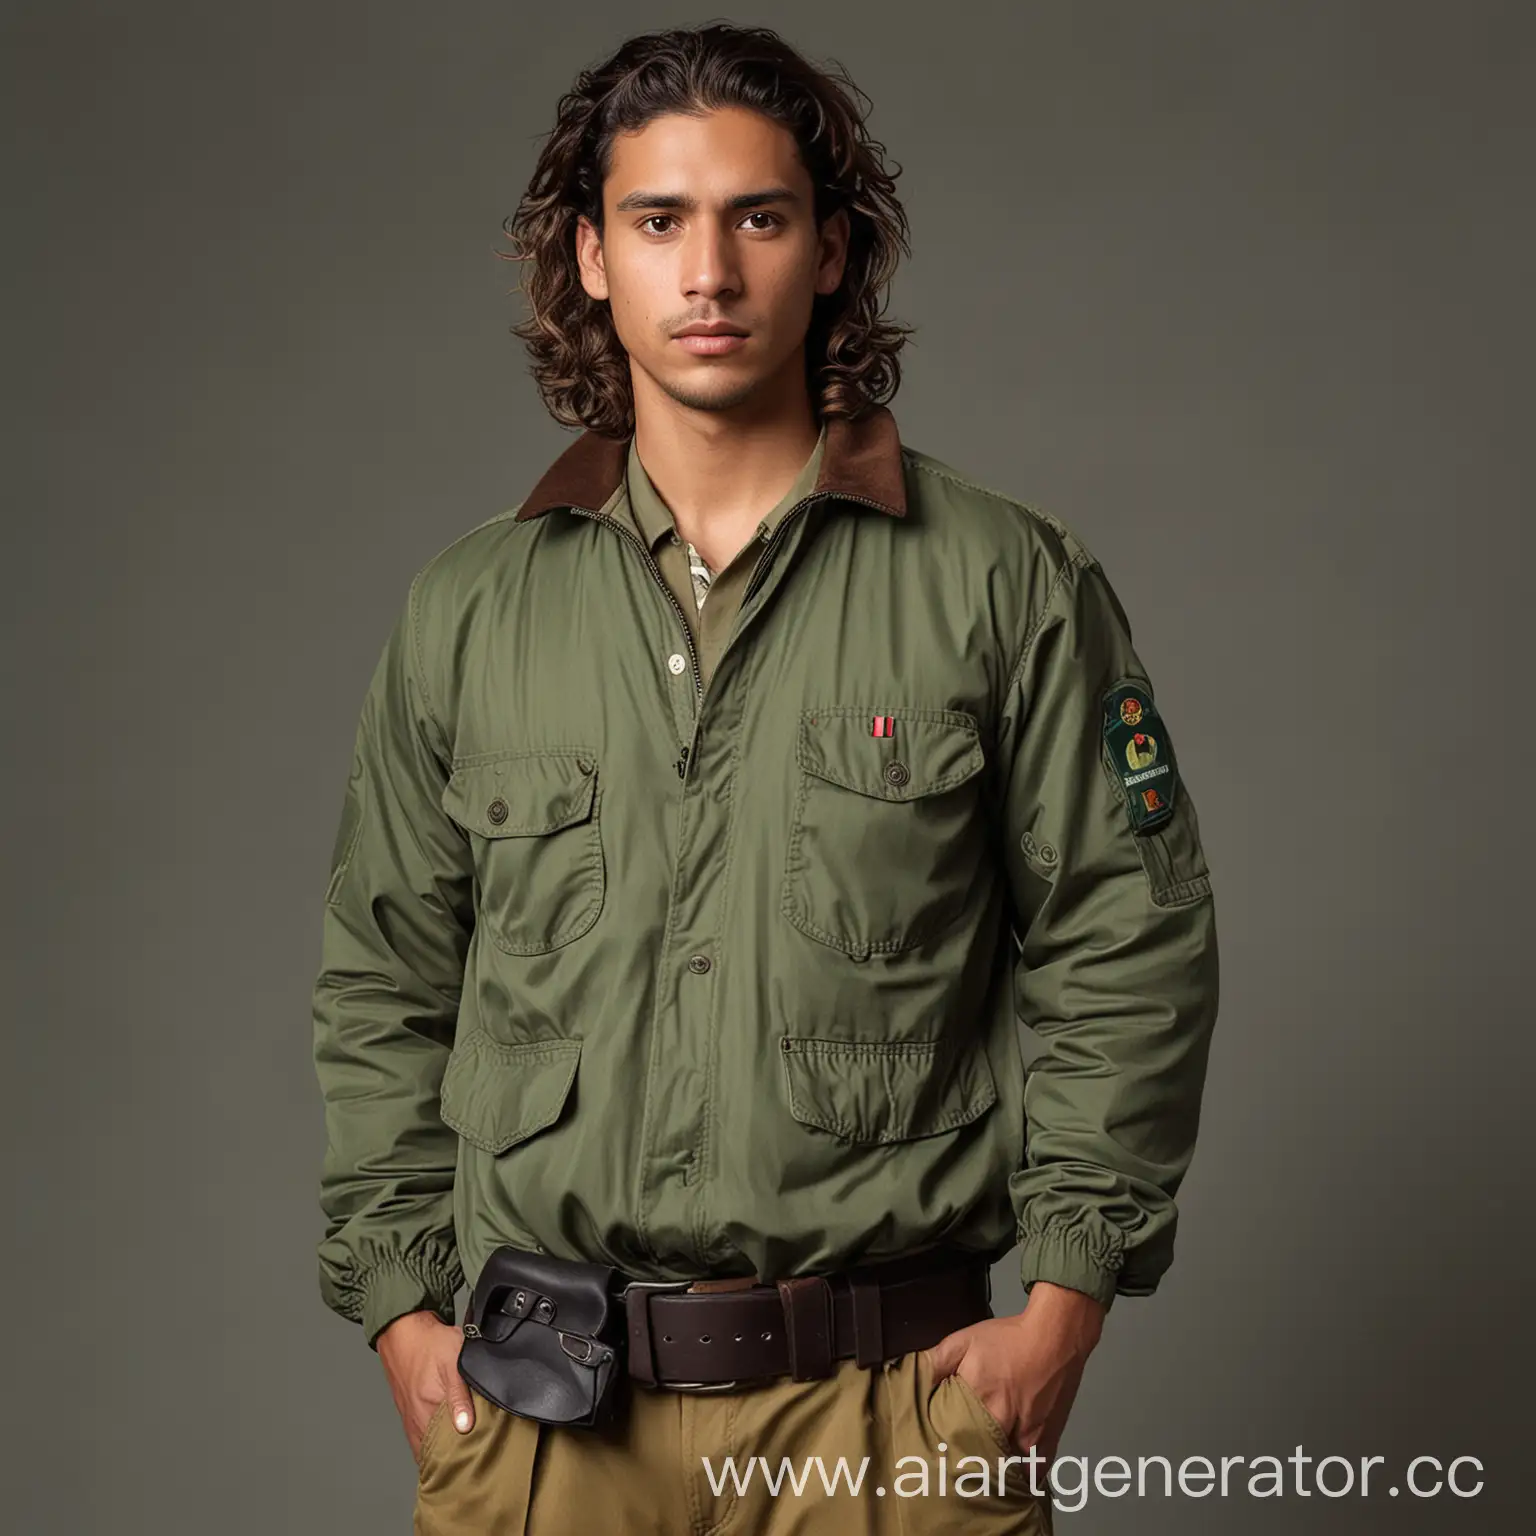 Latin-Man-in-Green-Jacket-with-Game-Bag-and-Long-Brown-Curly-Hair